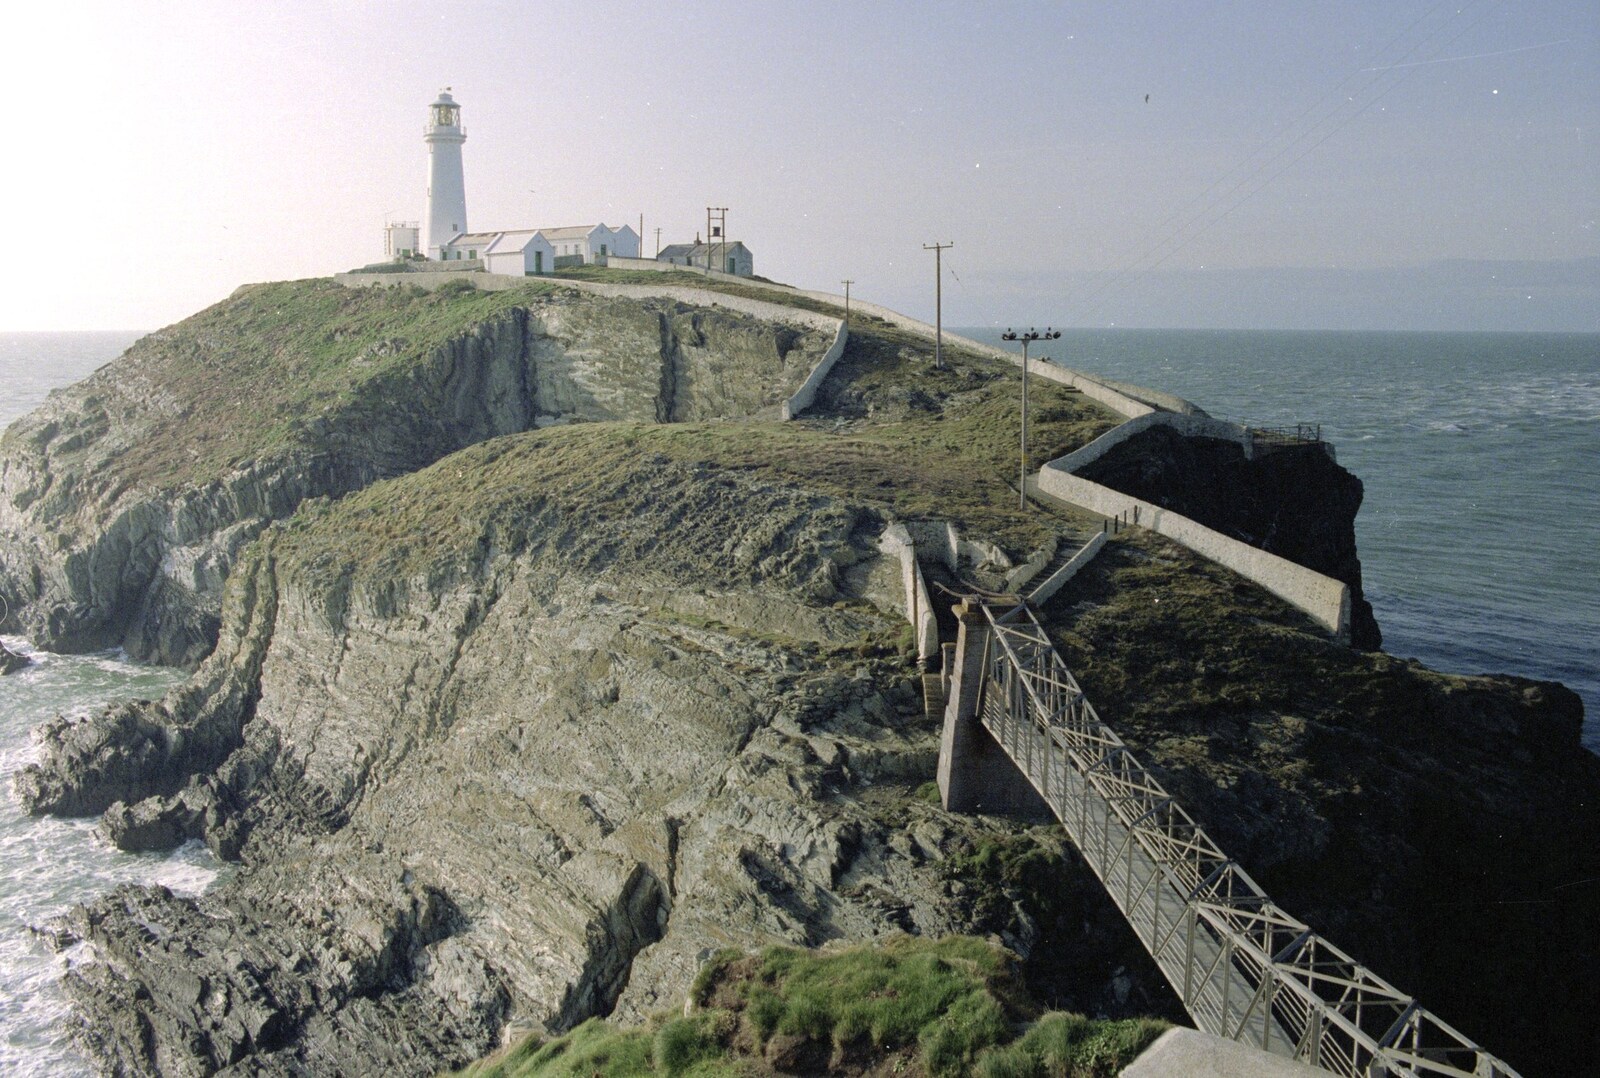 South Stack and the lighthouse from Capel Curig to Abergavenny: A Road-Trip With Hamish, Wales - 3rd April 1992